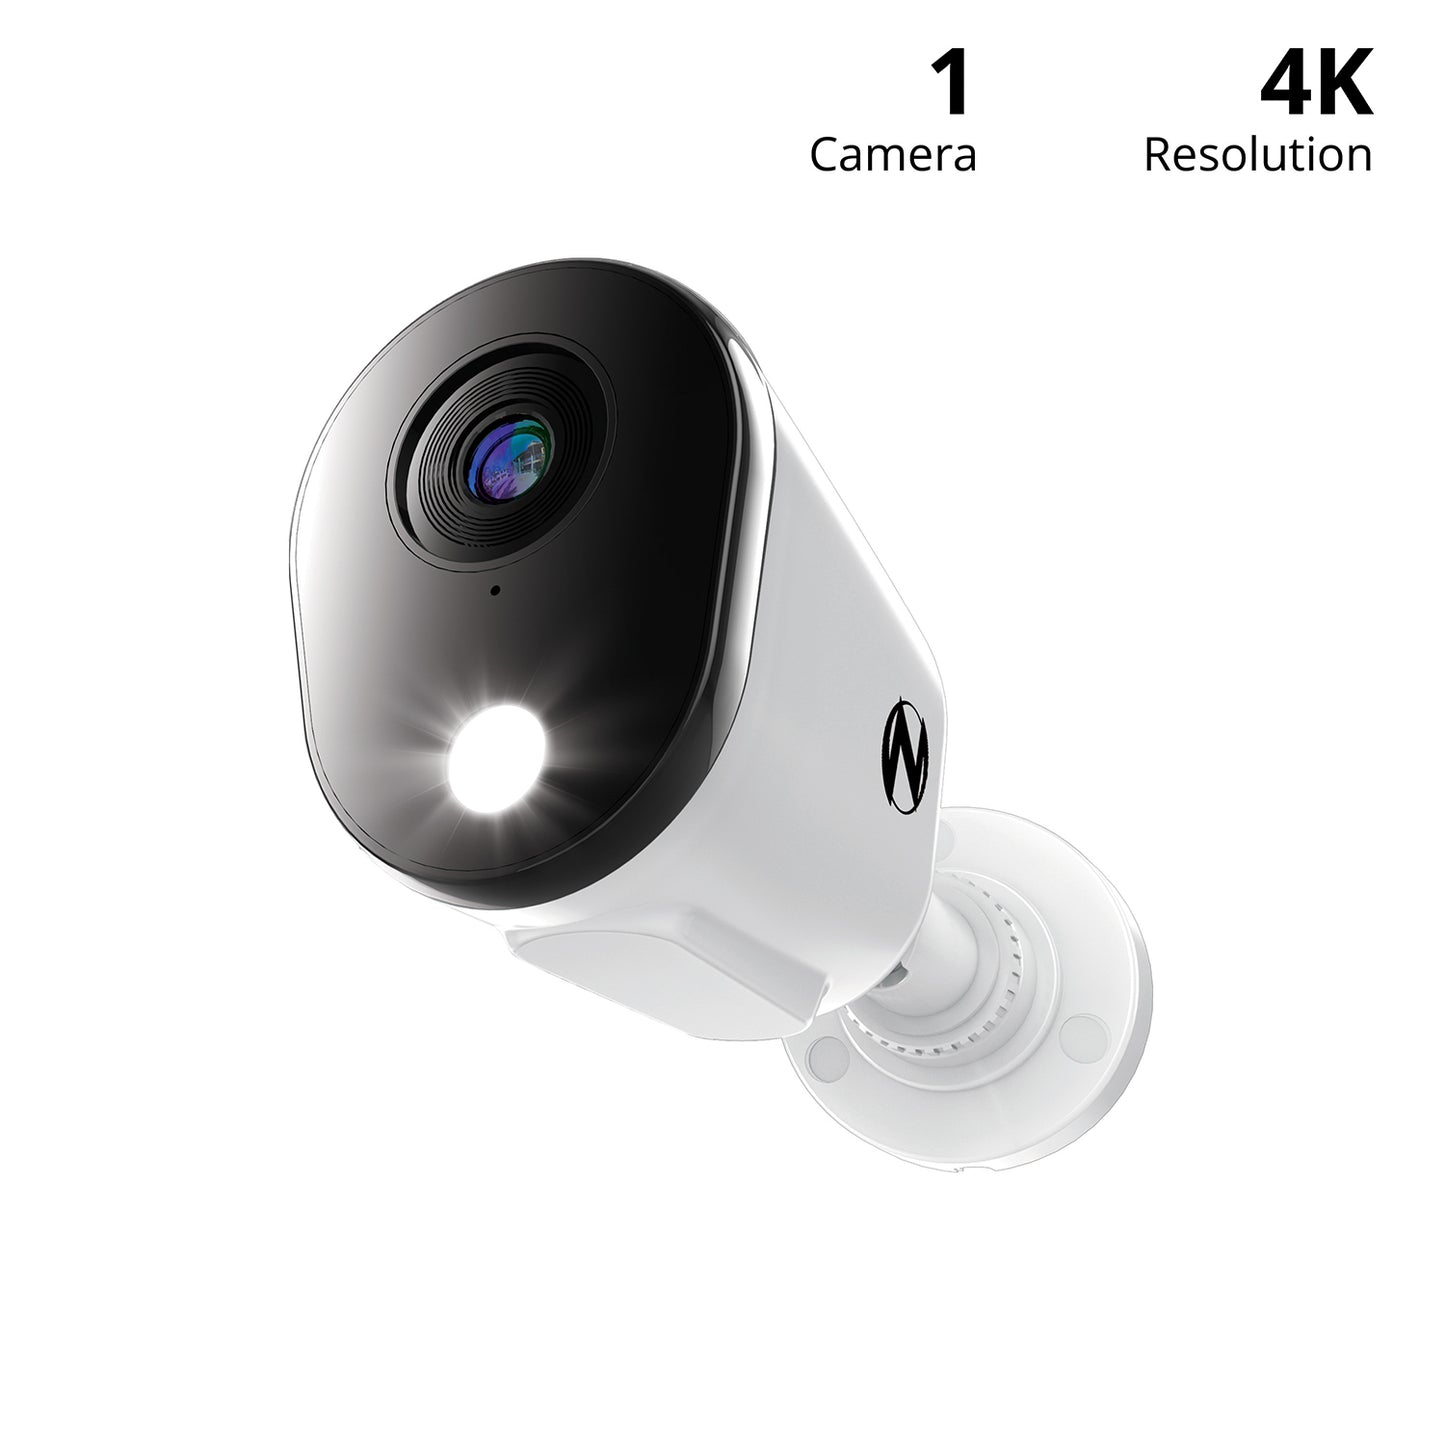 Add On Wired 4K Deterrence Camera with 2-Way Audio - White - Camera Cable Not Included